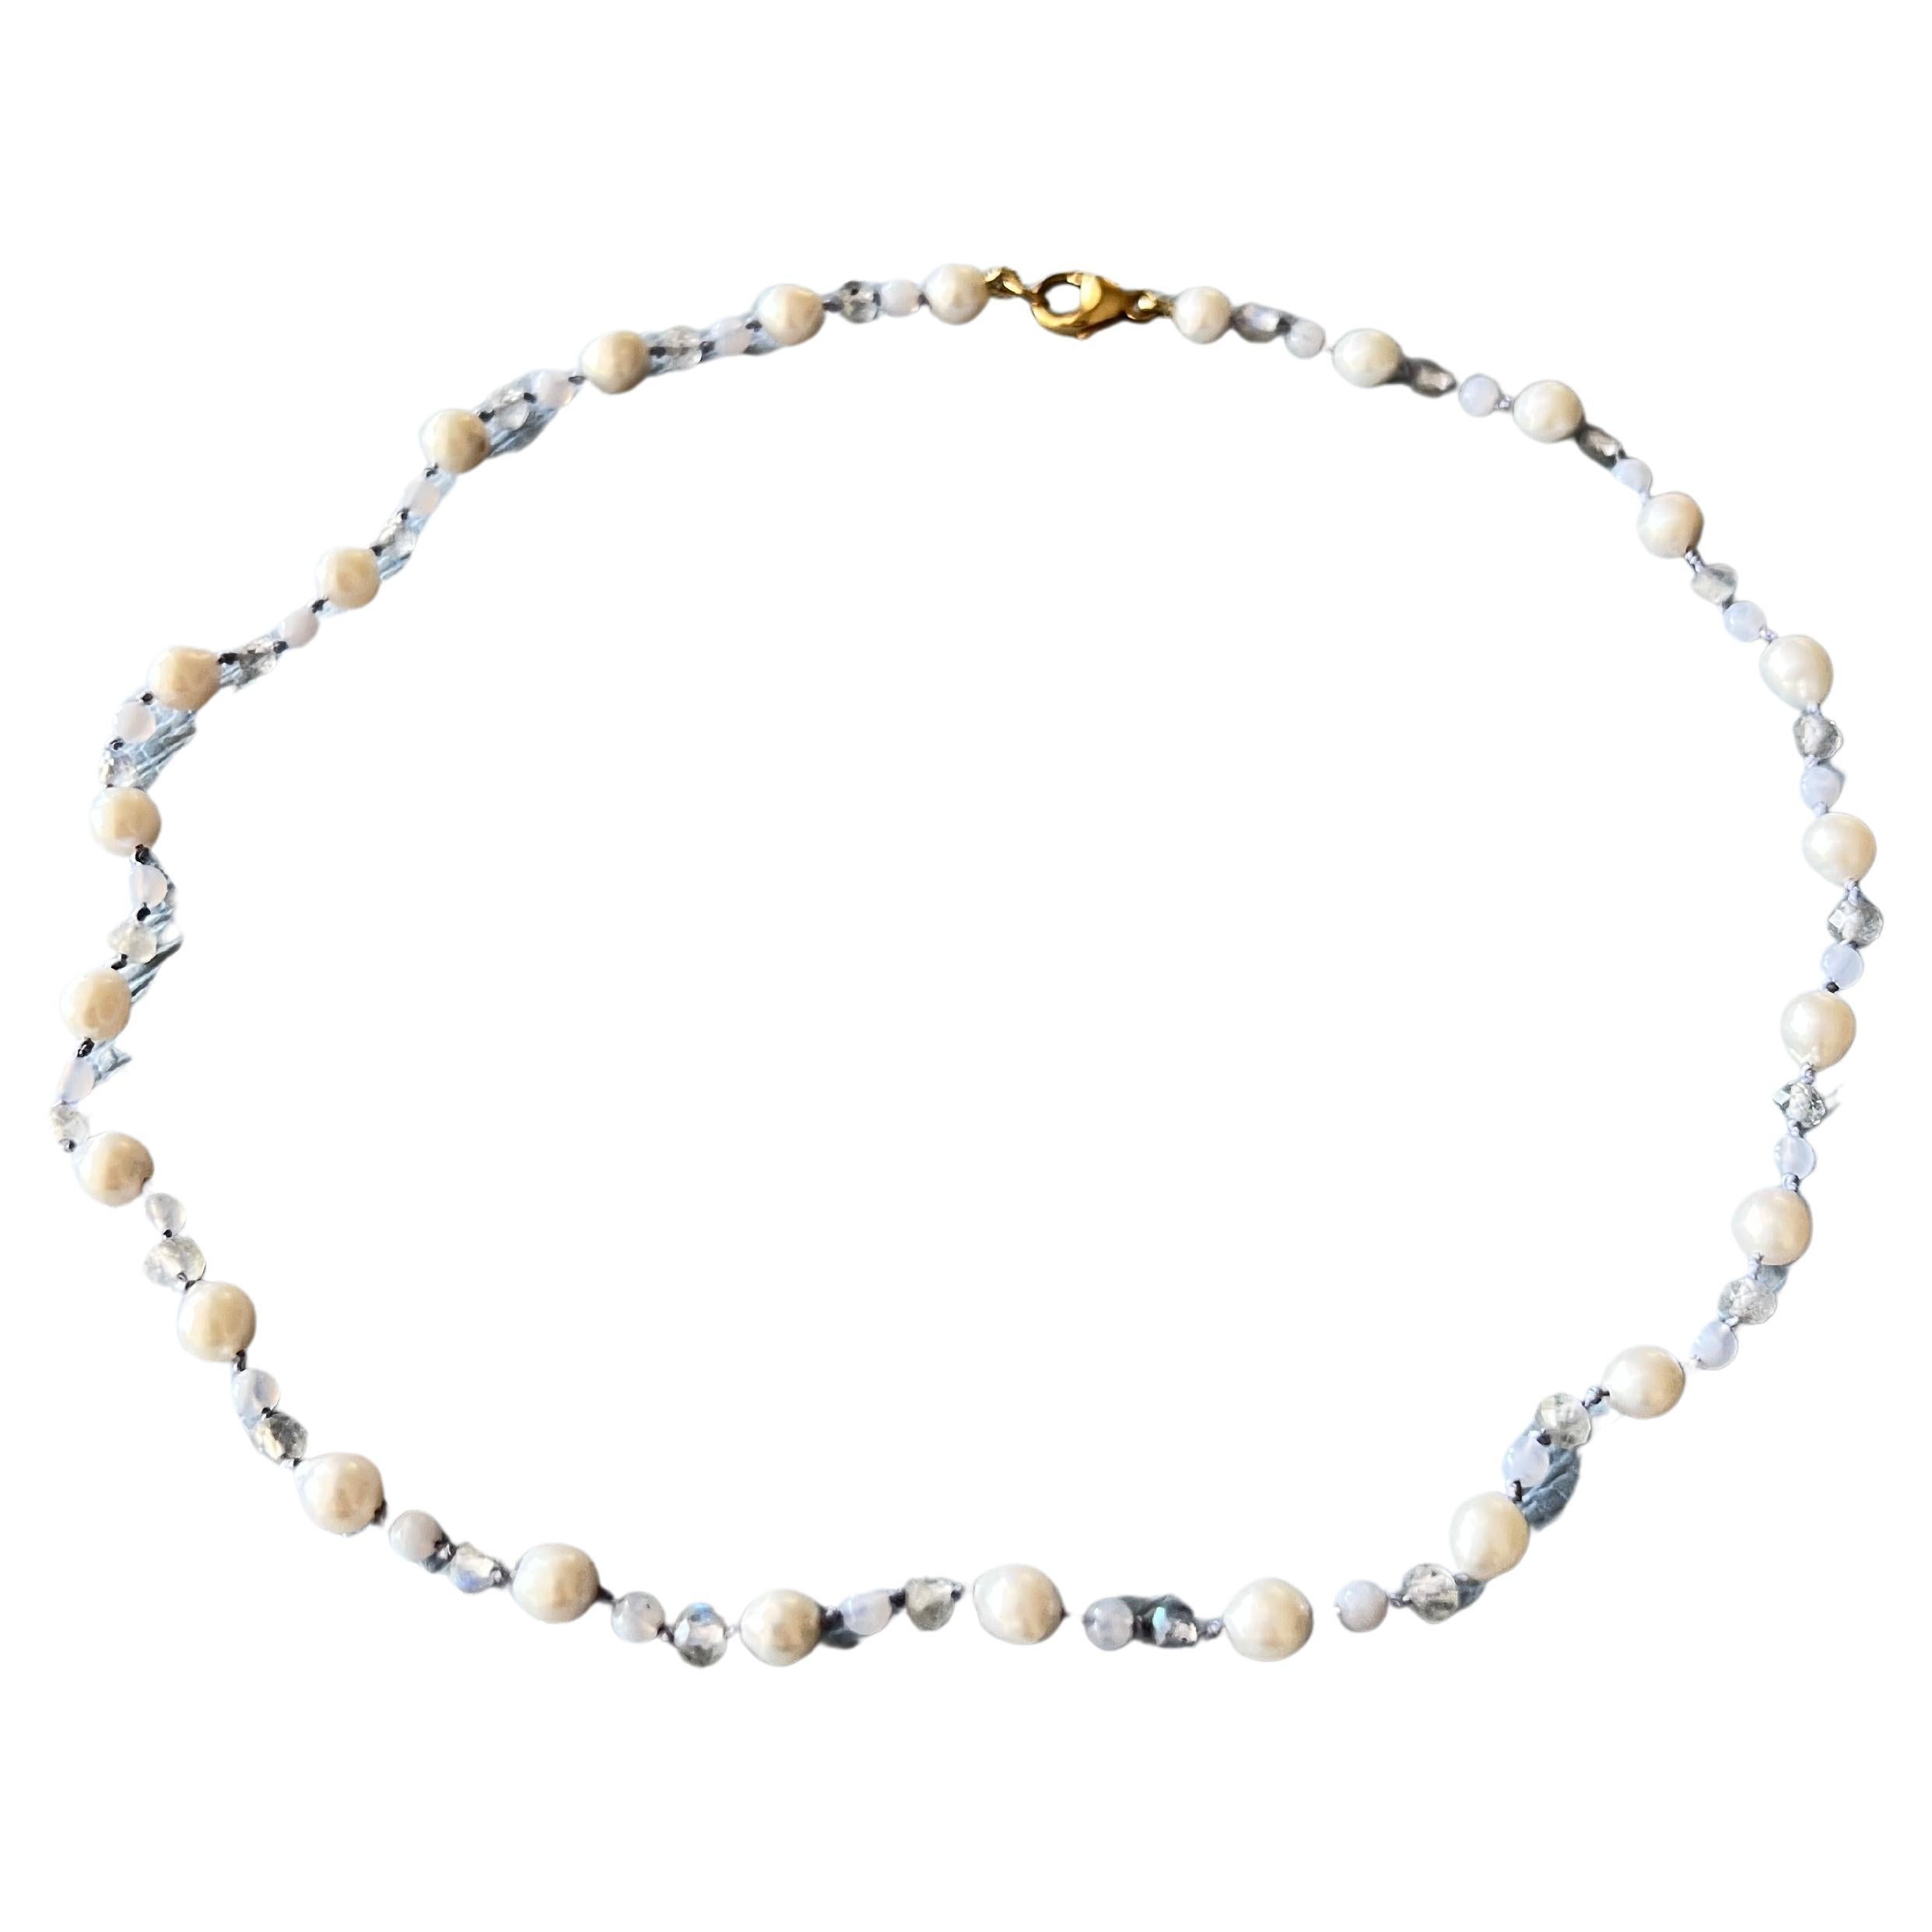 White Pearl Labradorite Blue Lace Agate Choker Necklace J Dauphin For Sale 1